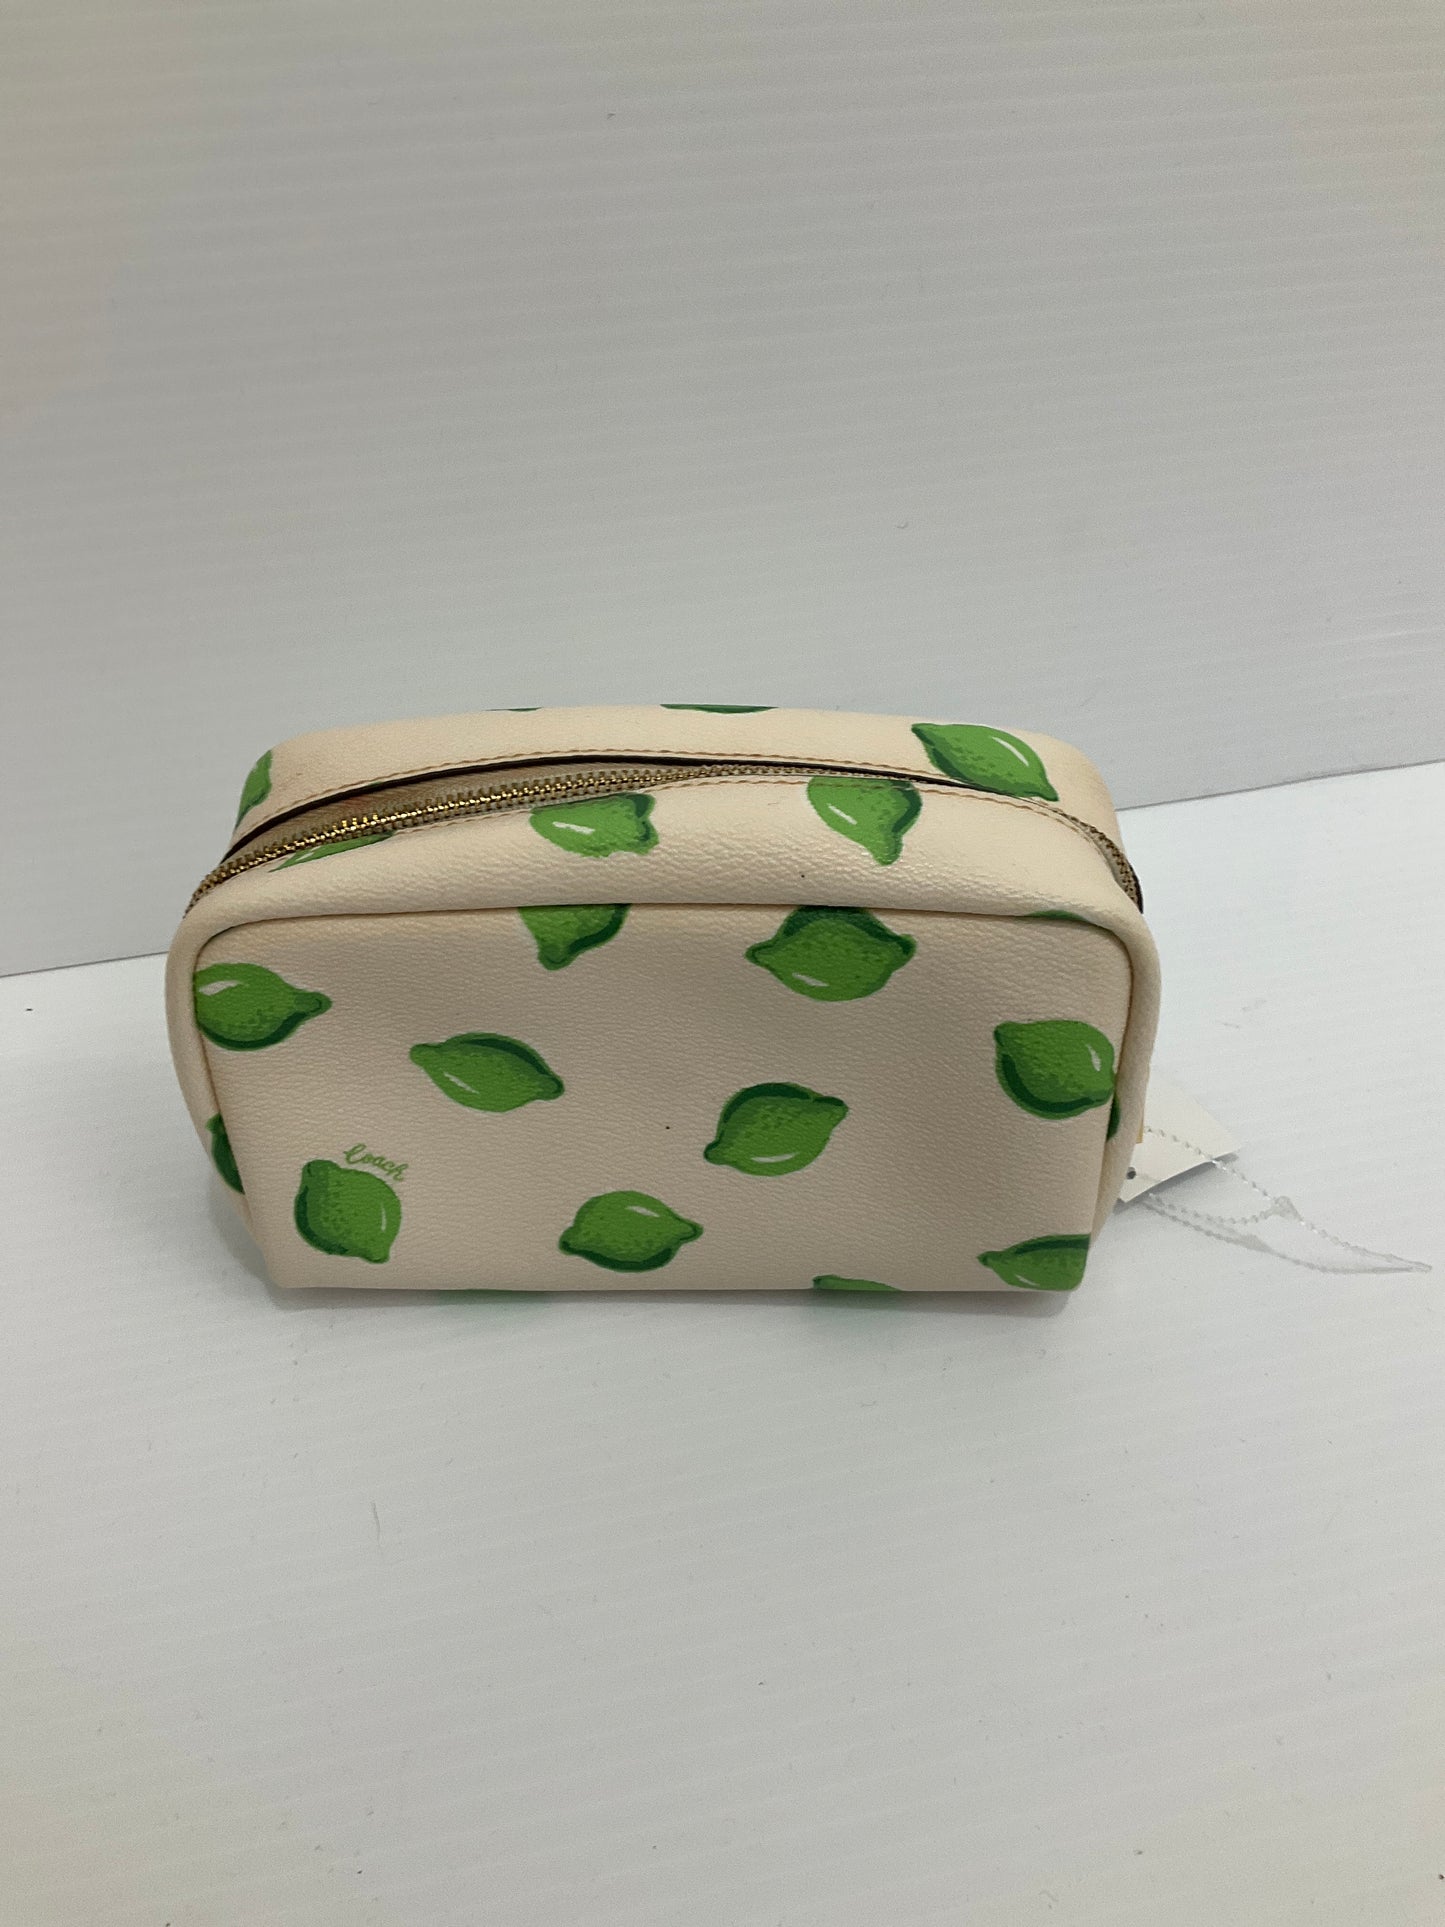 Makeup Bag Designer By Coach  Size: Small